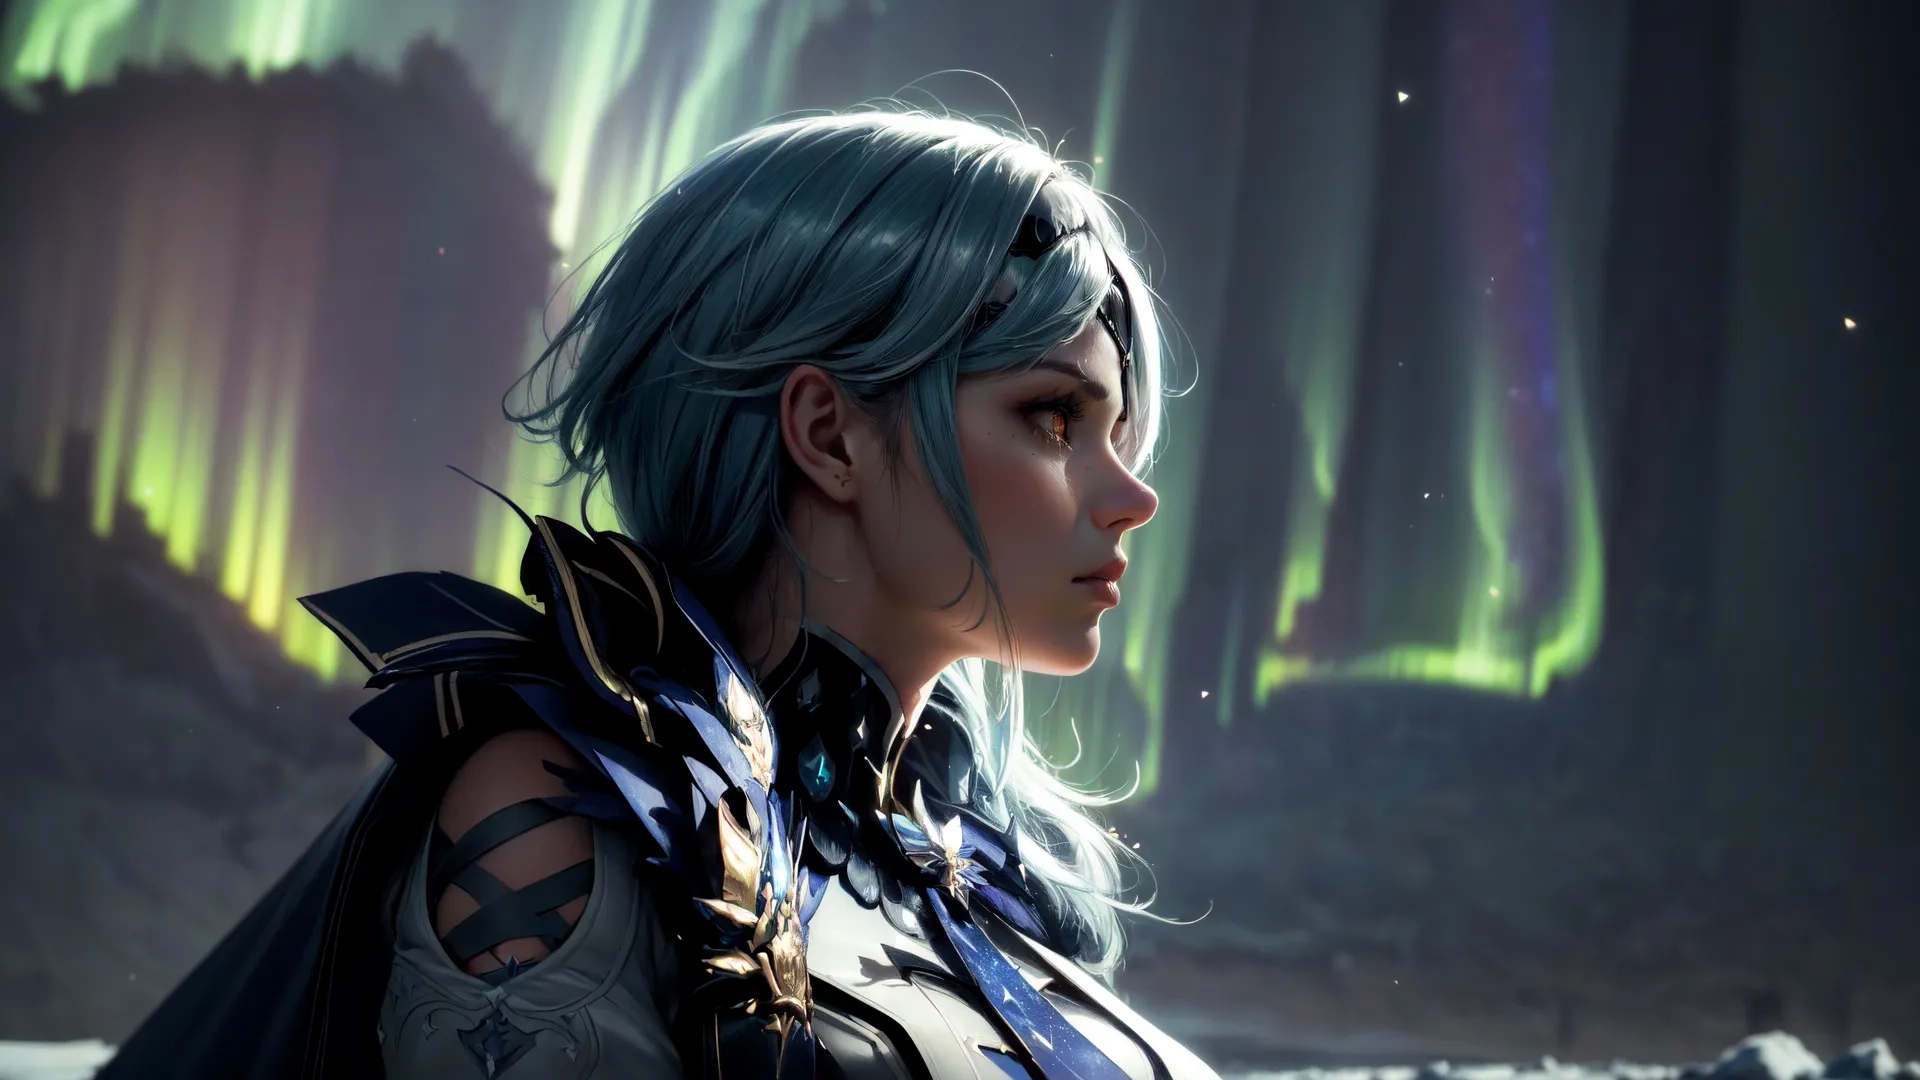 the anime's female is in futuristic dress, with purple hair and light gray hair she is looking at an auroral display above her head
